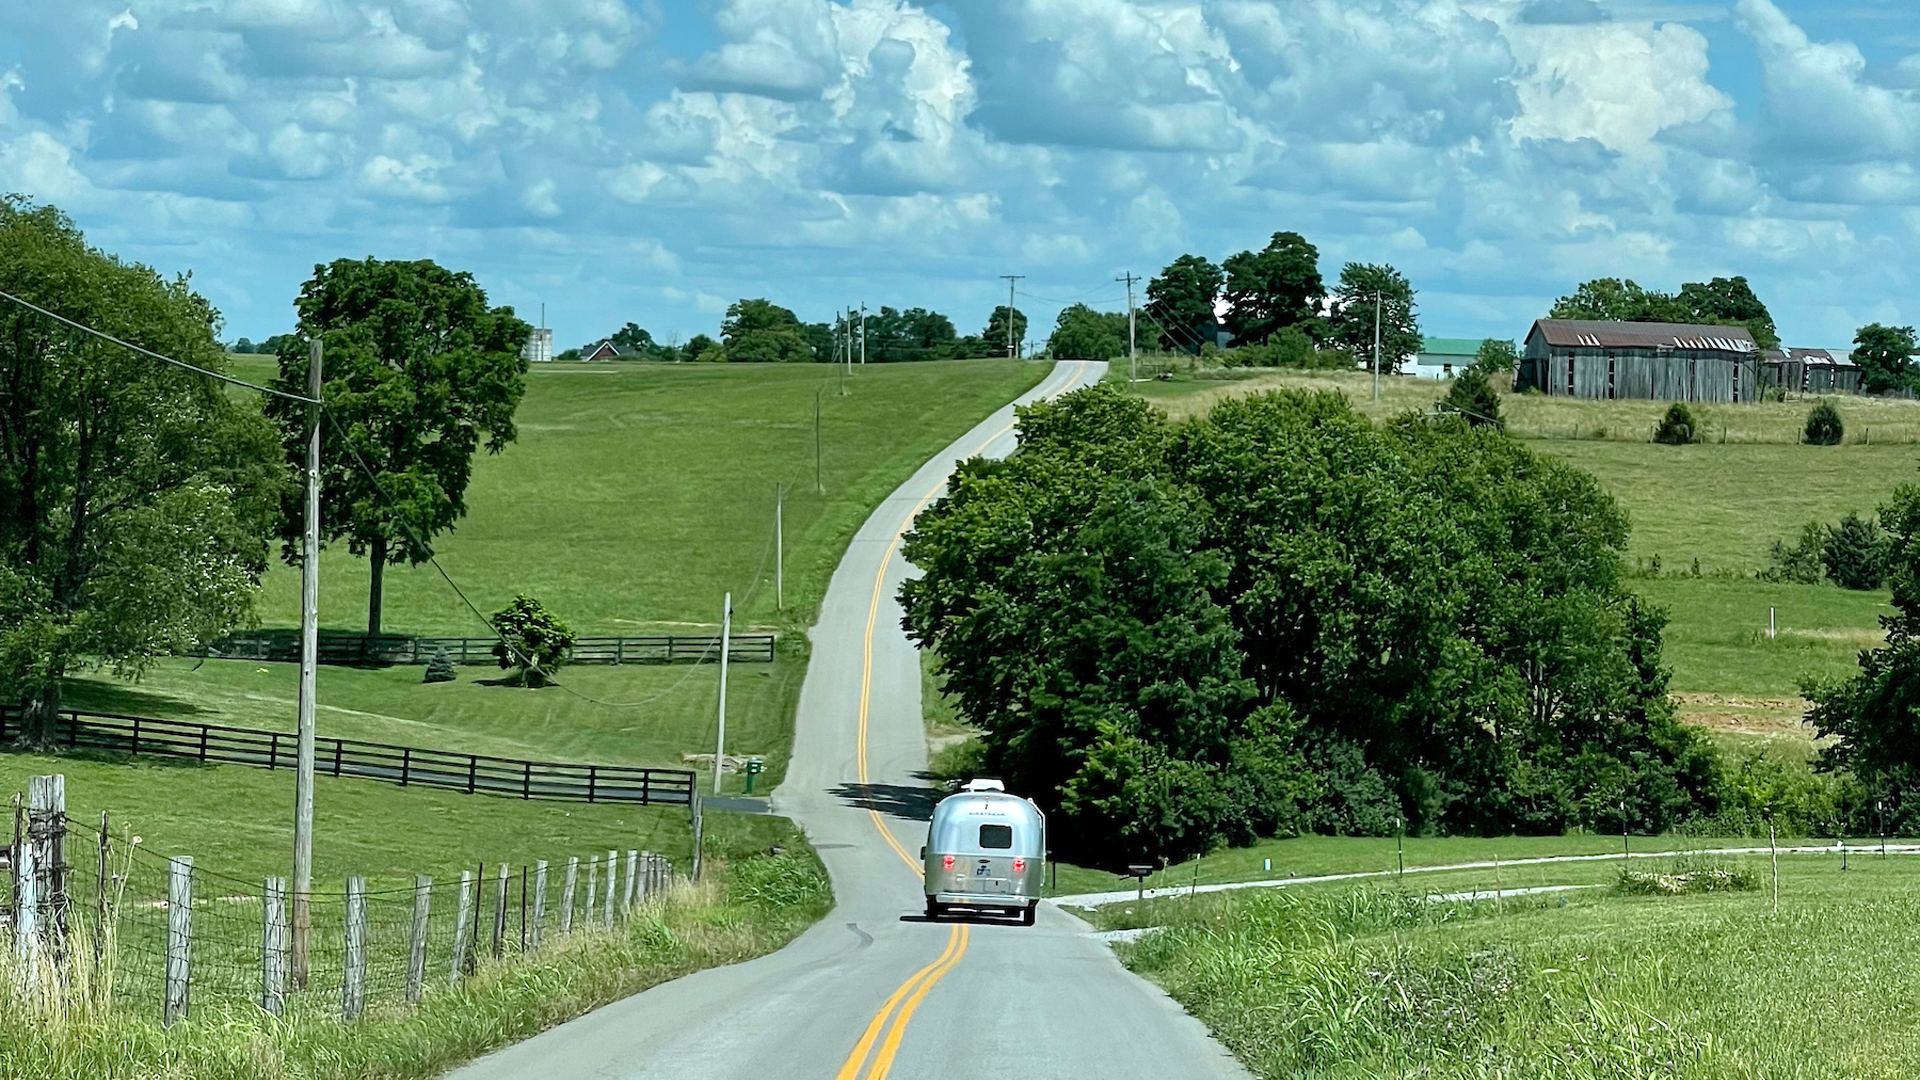 An Airstream Flying Cloud travel trailer being towed down the road on a countryside with lots of hills and trees.